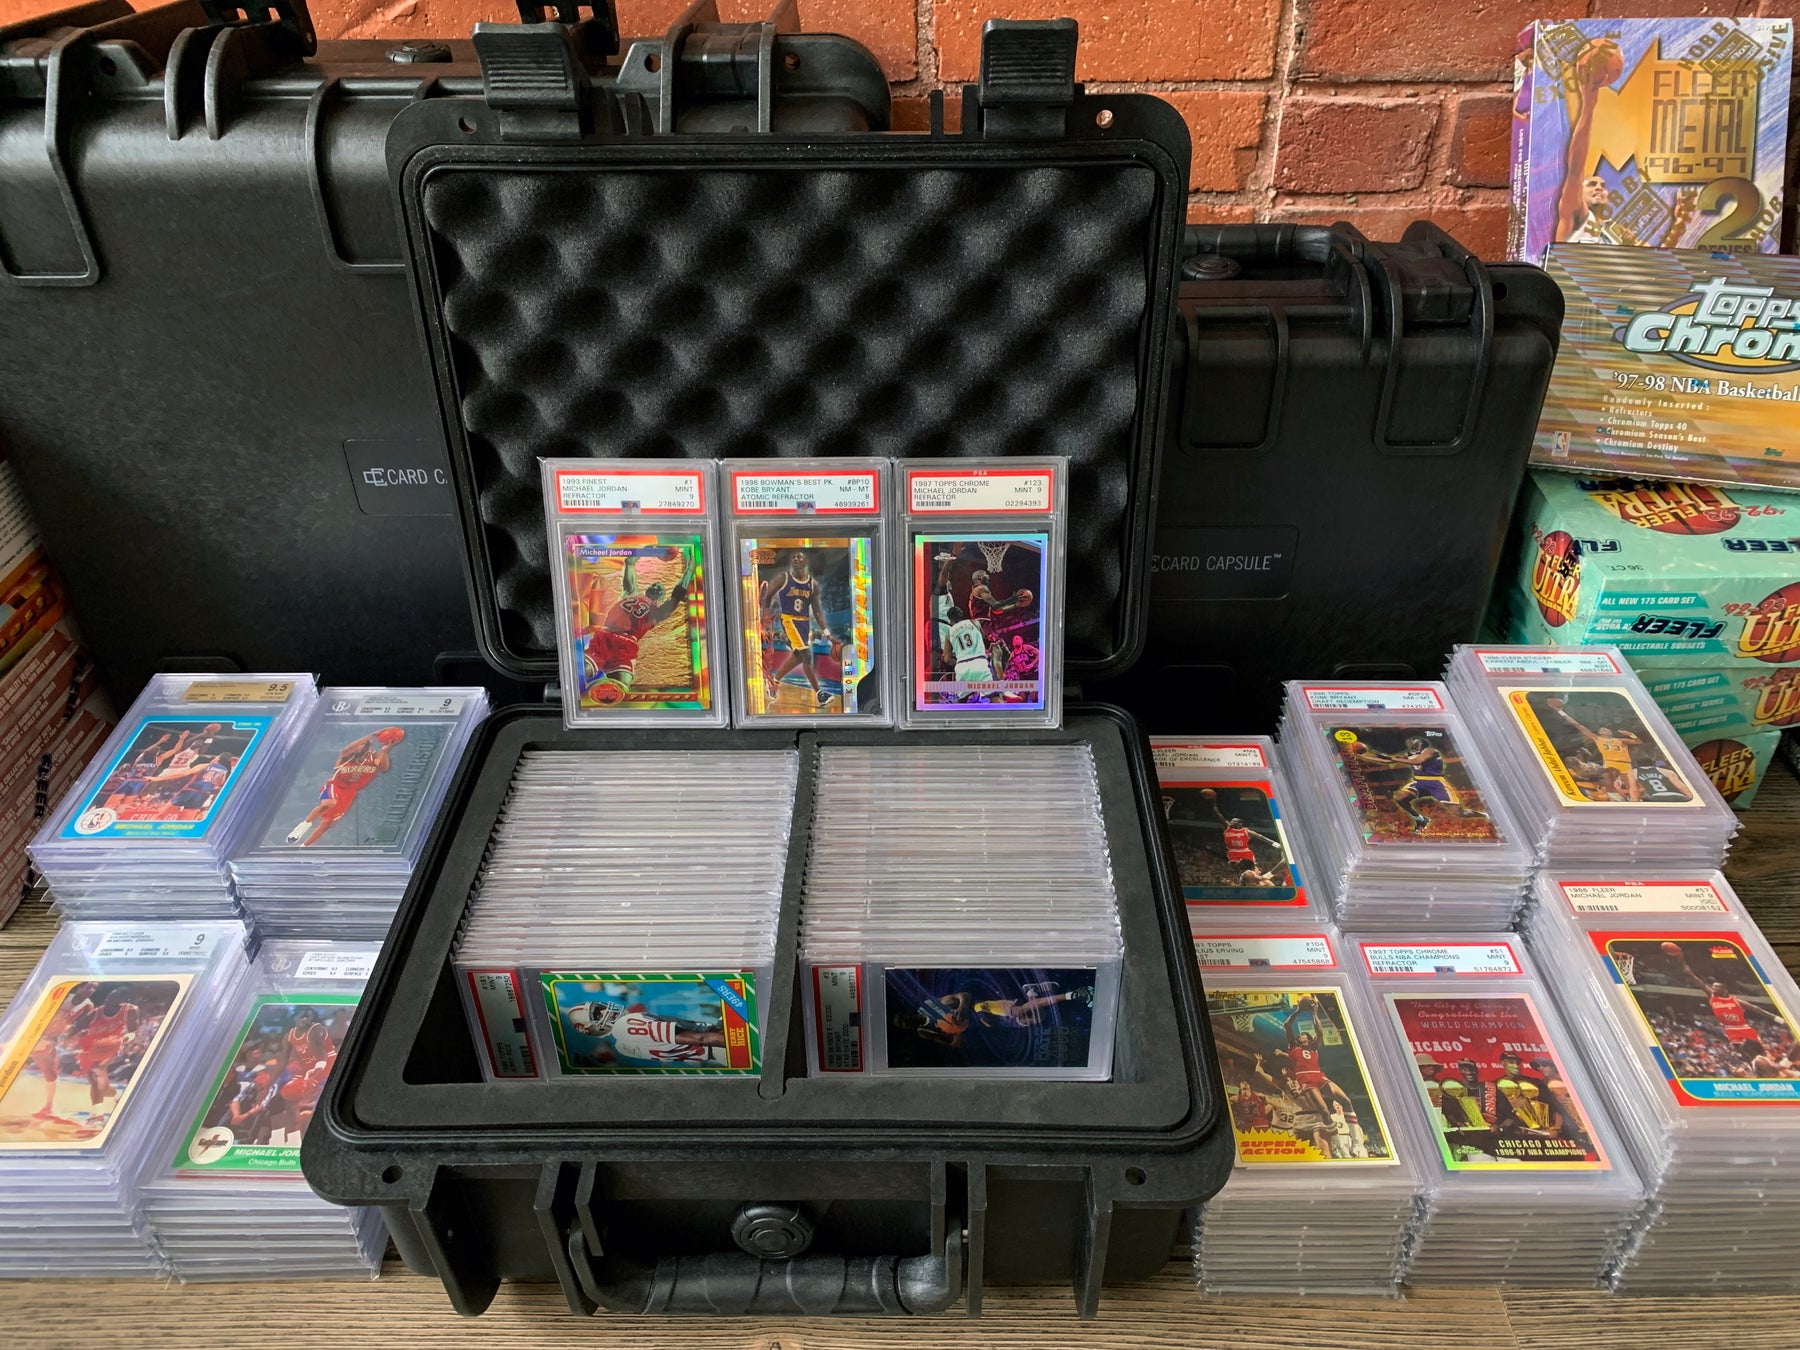 A Card Capsule Genesis waterproof case designed for PSA graded cards is placed on a table surrounded by piles of PSA slabbed cards and various other Card Capsule products